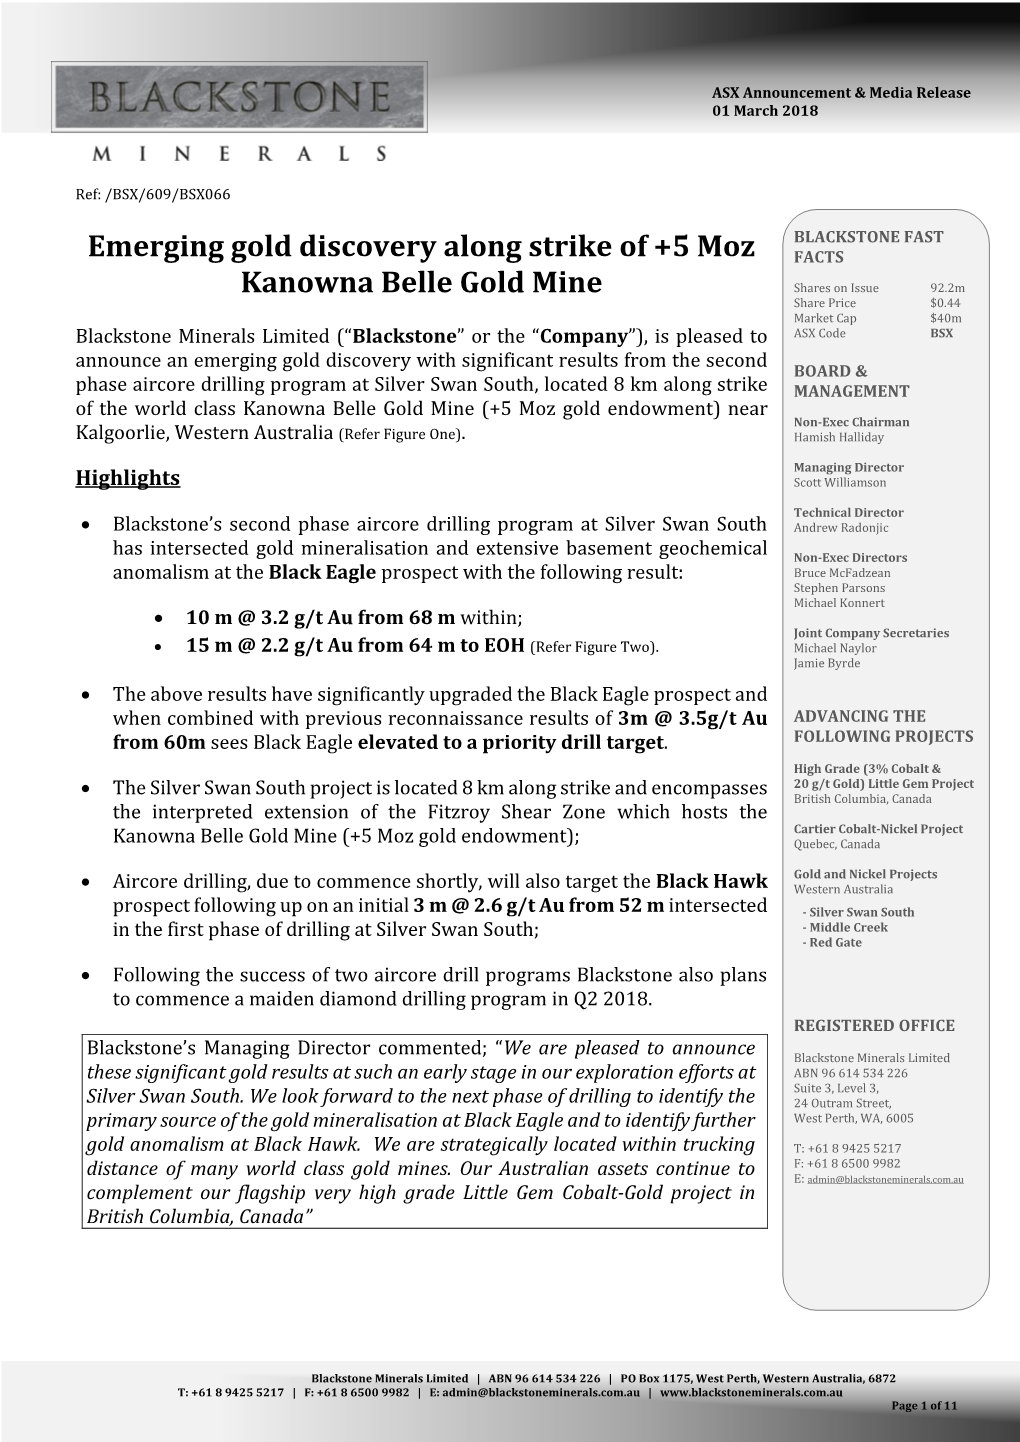 Emerging Gold Discovery Along Strike of +5 Moz Kanowna Belle Gold Mine